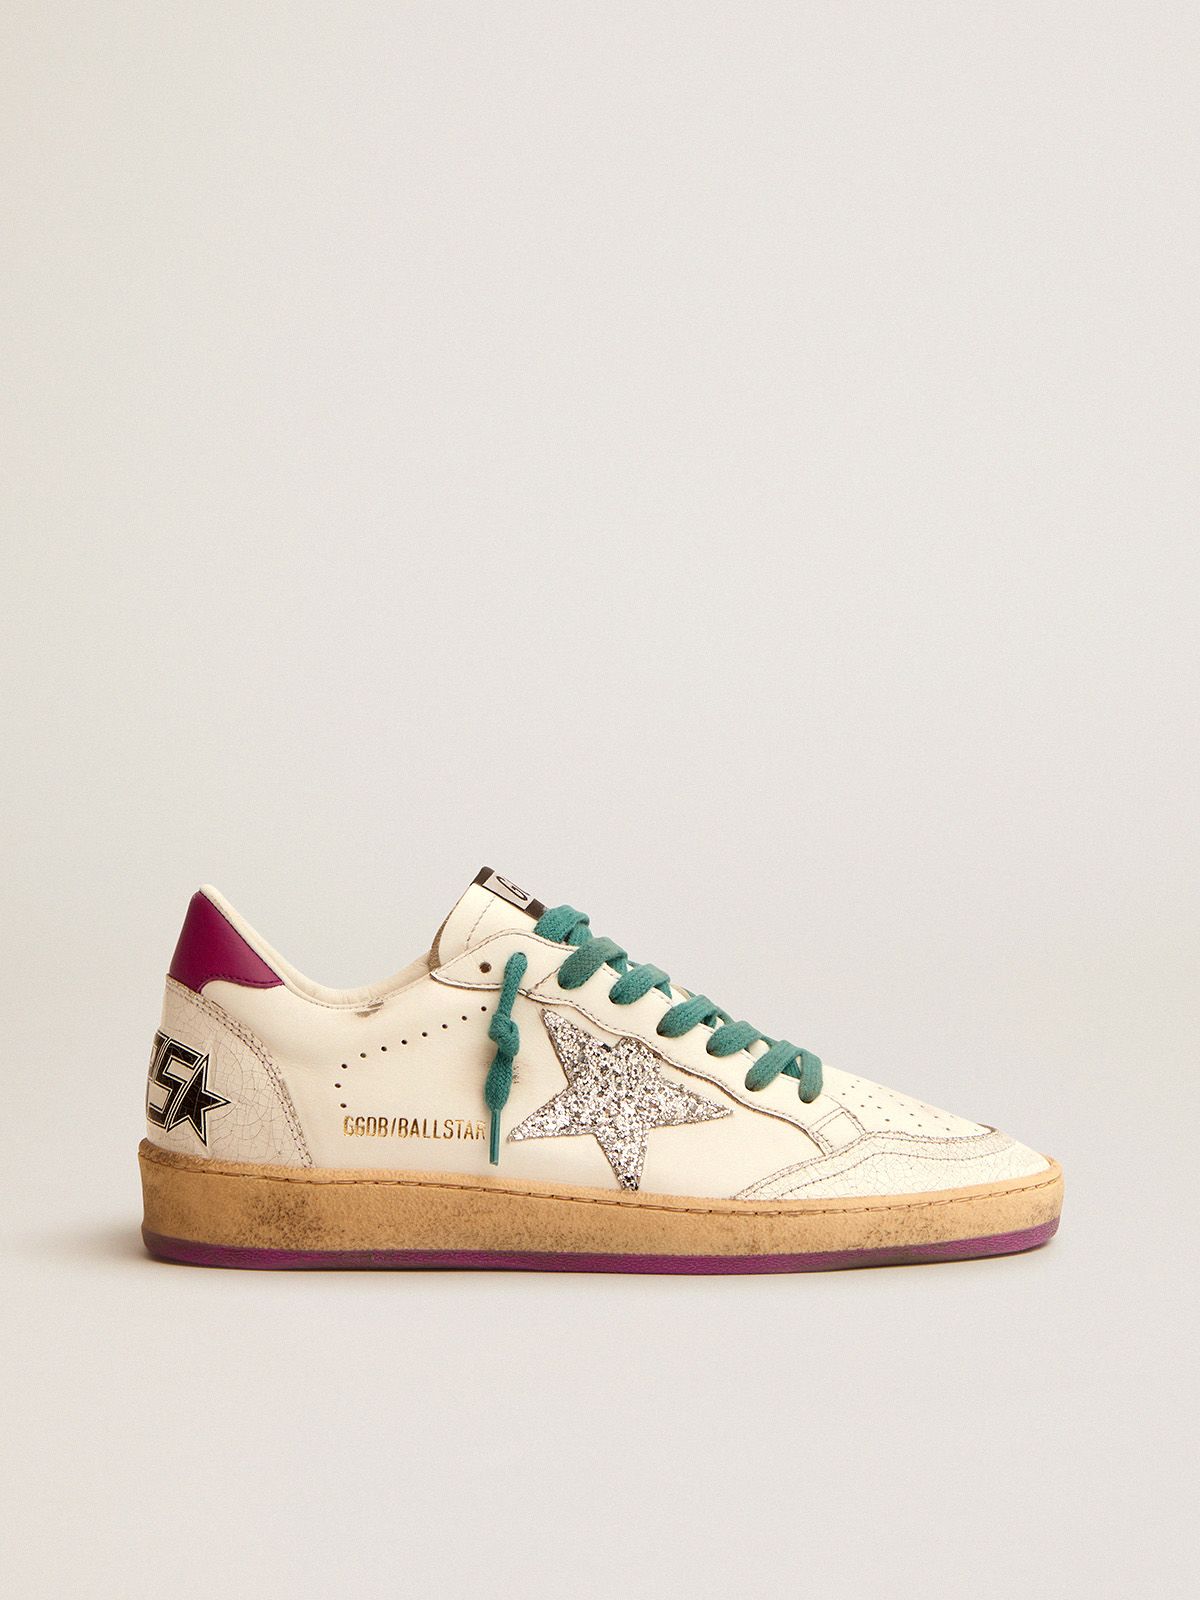 golden goose purple silver white sneakers tab Star glitter star and leather Ball LTD in with heel